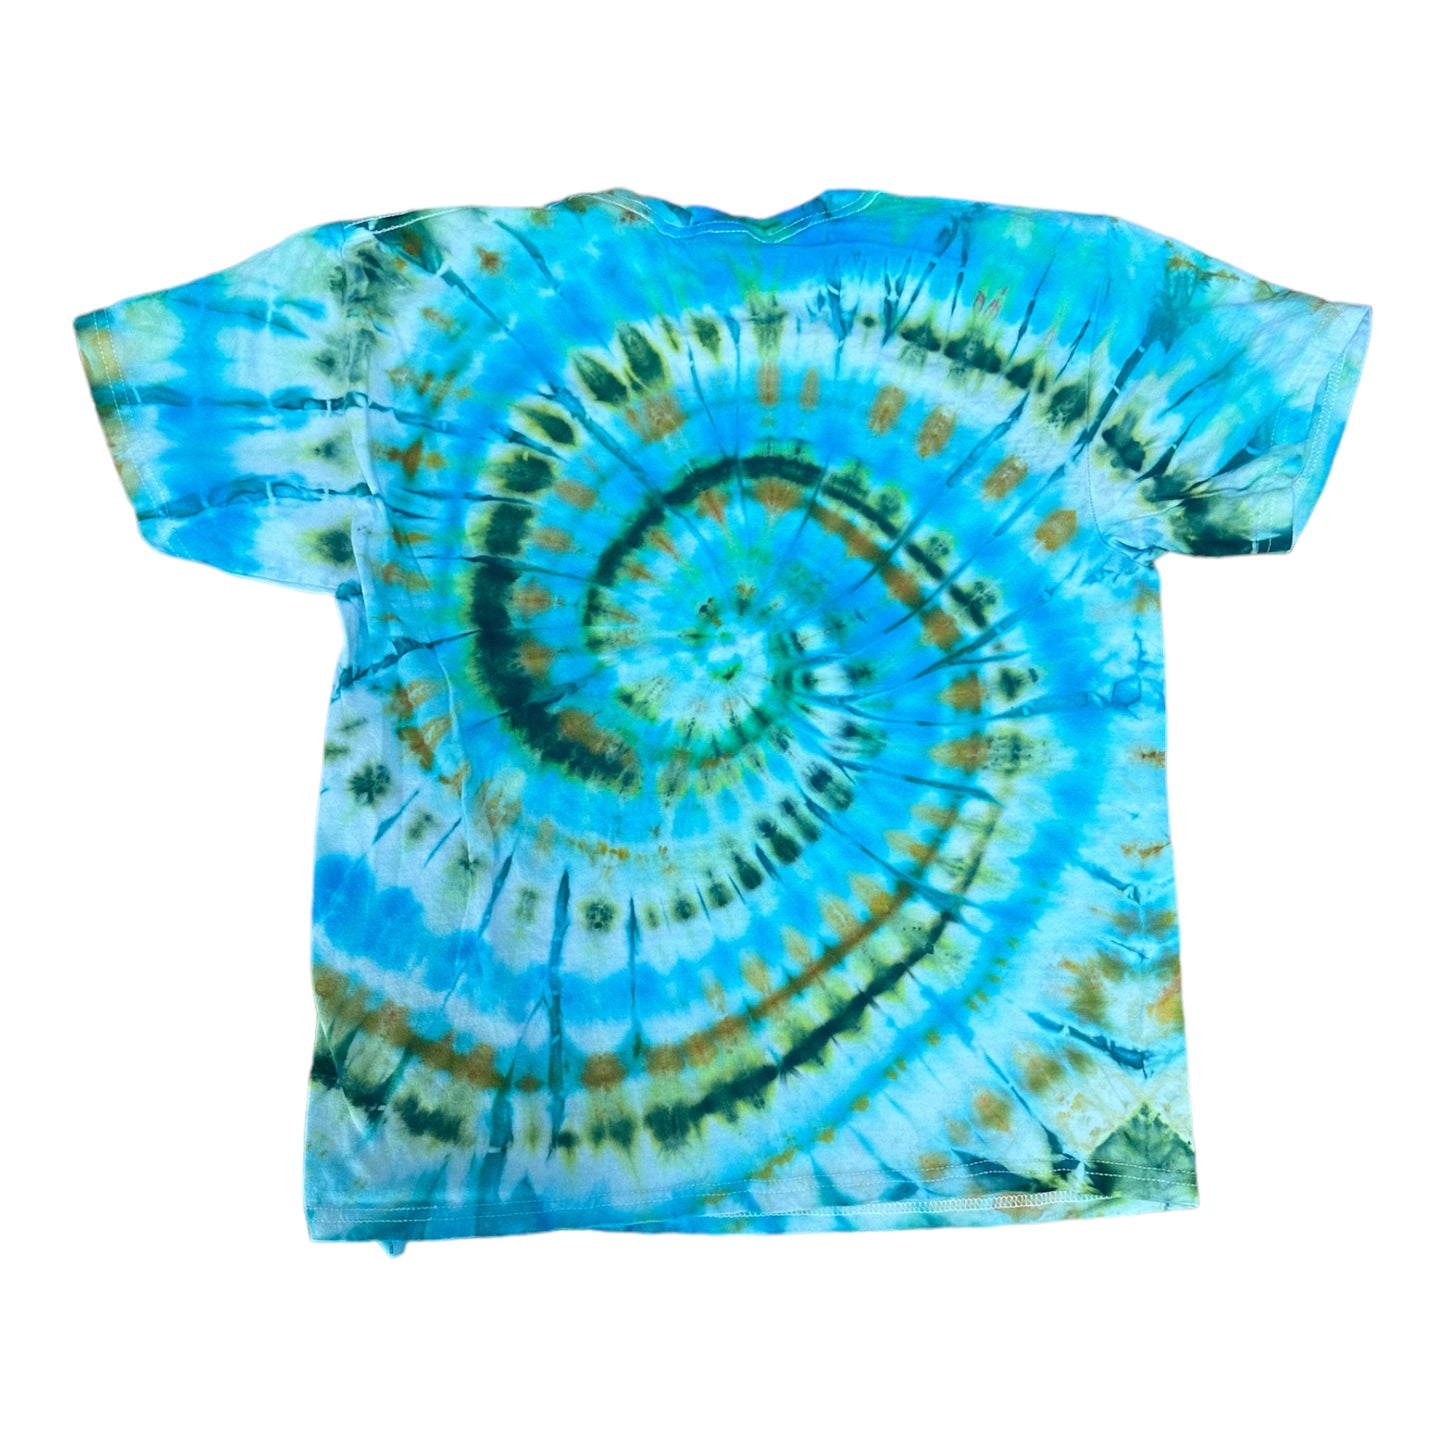 Youth Large Blue Green and Gold Spiral Ice Dye Tie Dye Shirt